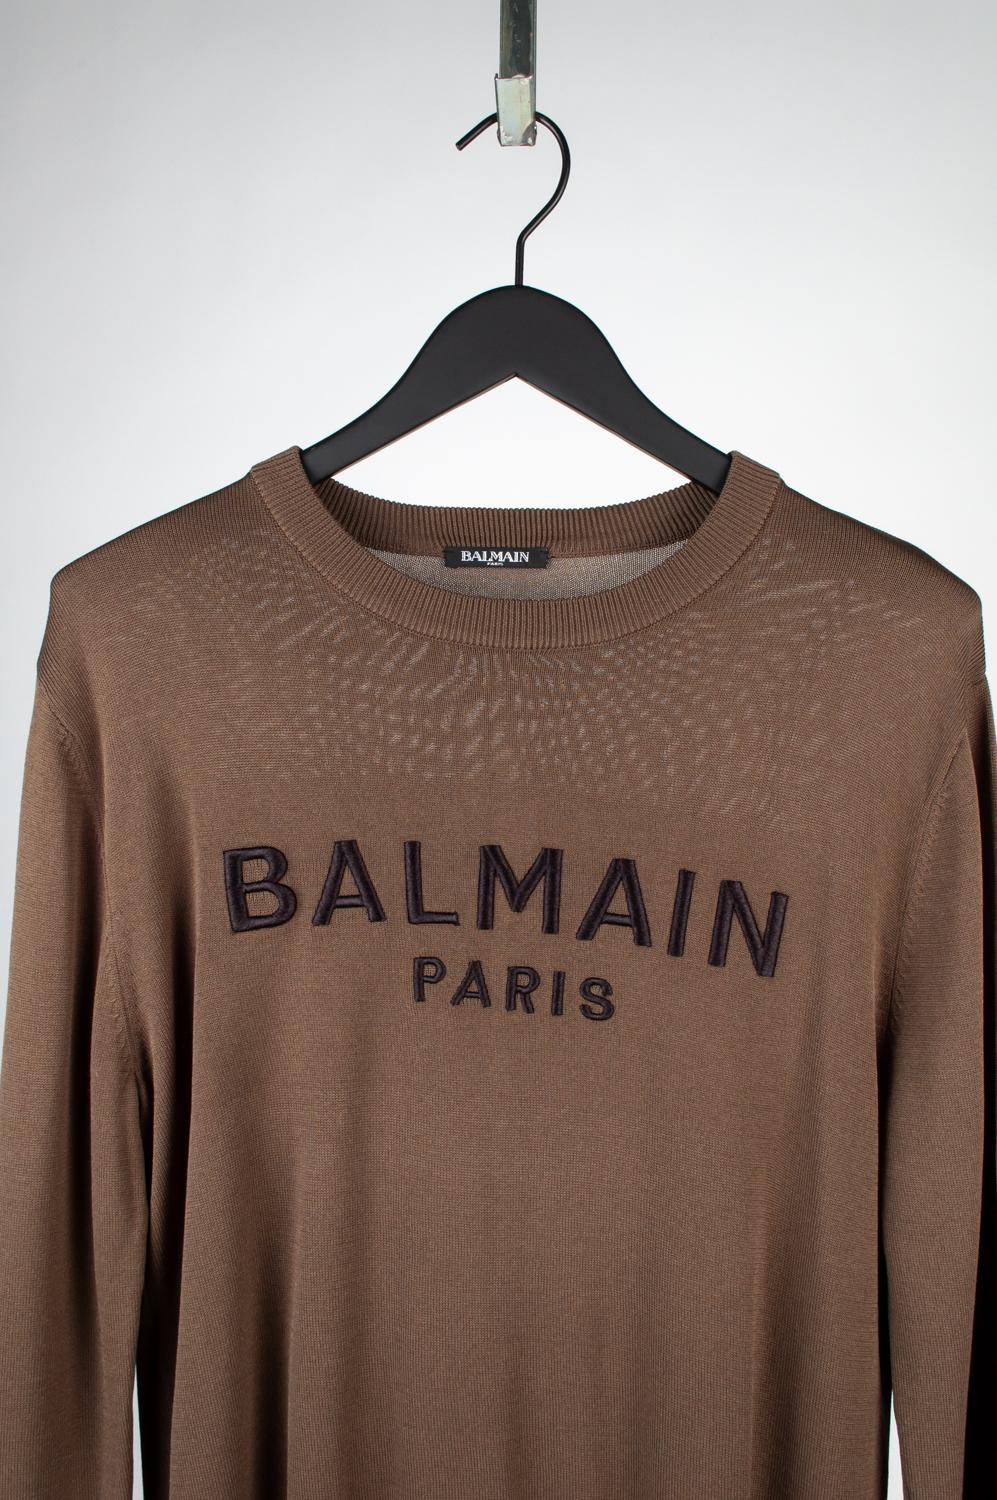 100% genuine Balmain Men Top Sweater, S606
Color: khaki
(An actual color may a bit vary due to individual computer screen interpretation)
Material: 65% viscose, 35% polyamide
Tag size: S/M
This sweater is great quality item. Rate 9 of 10, excellent